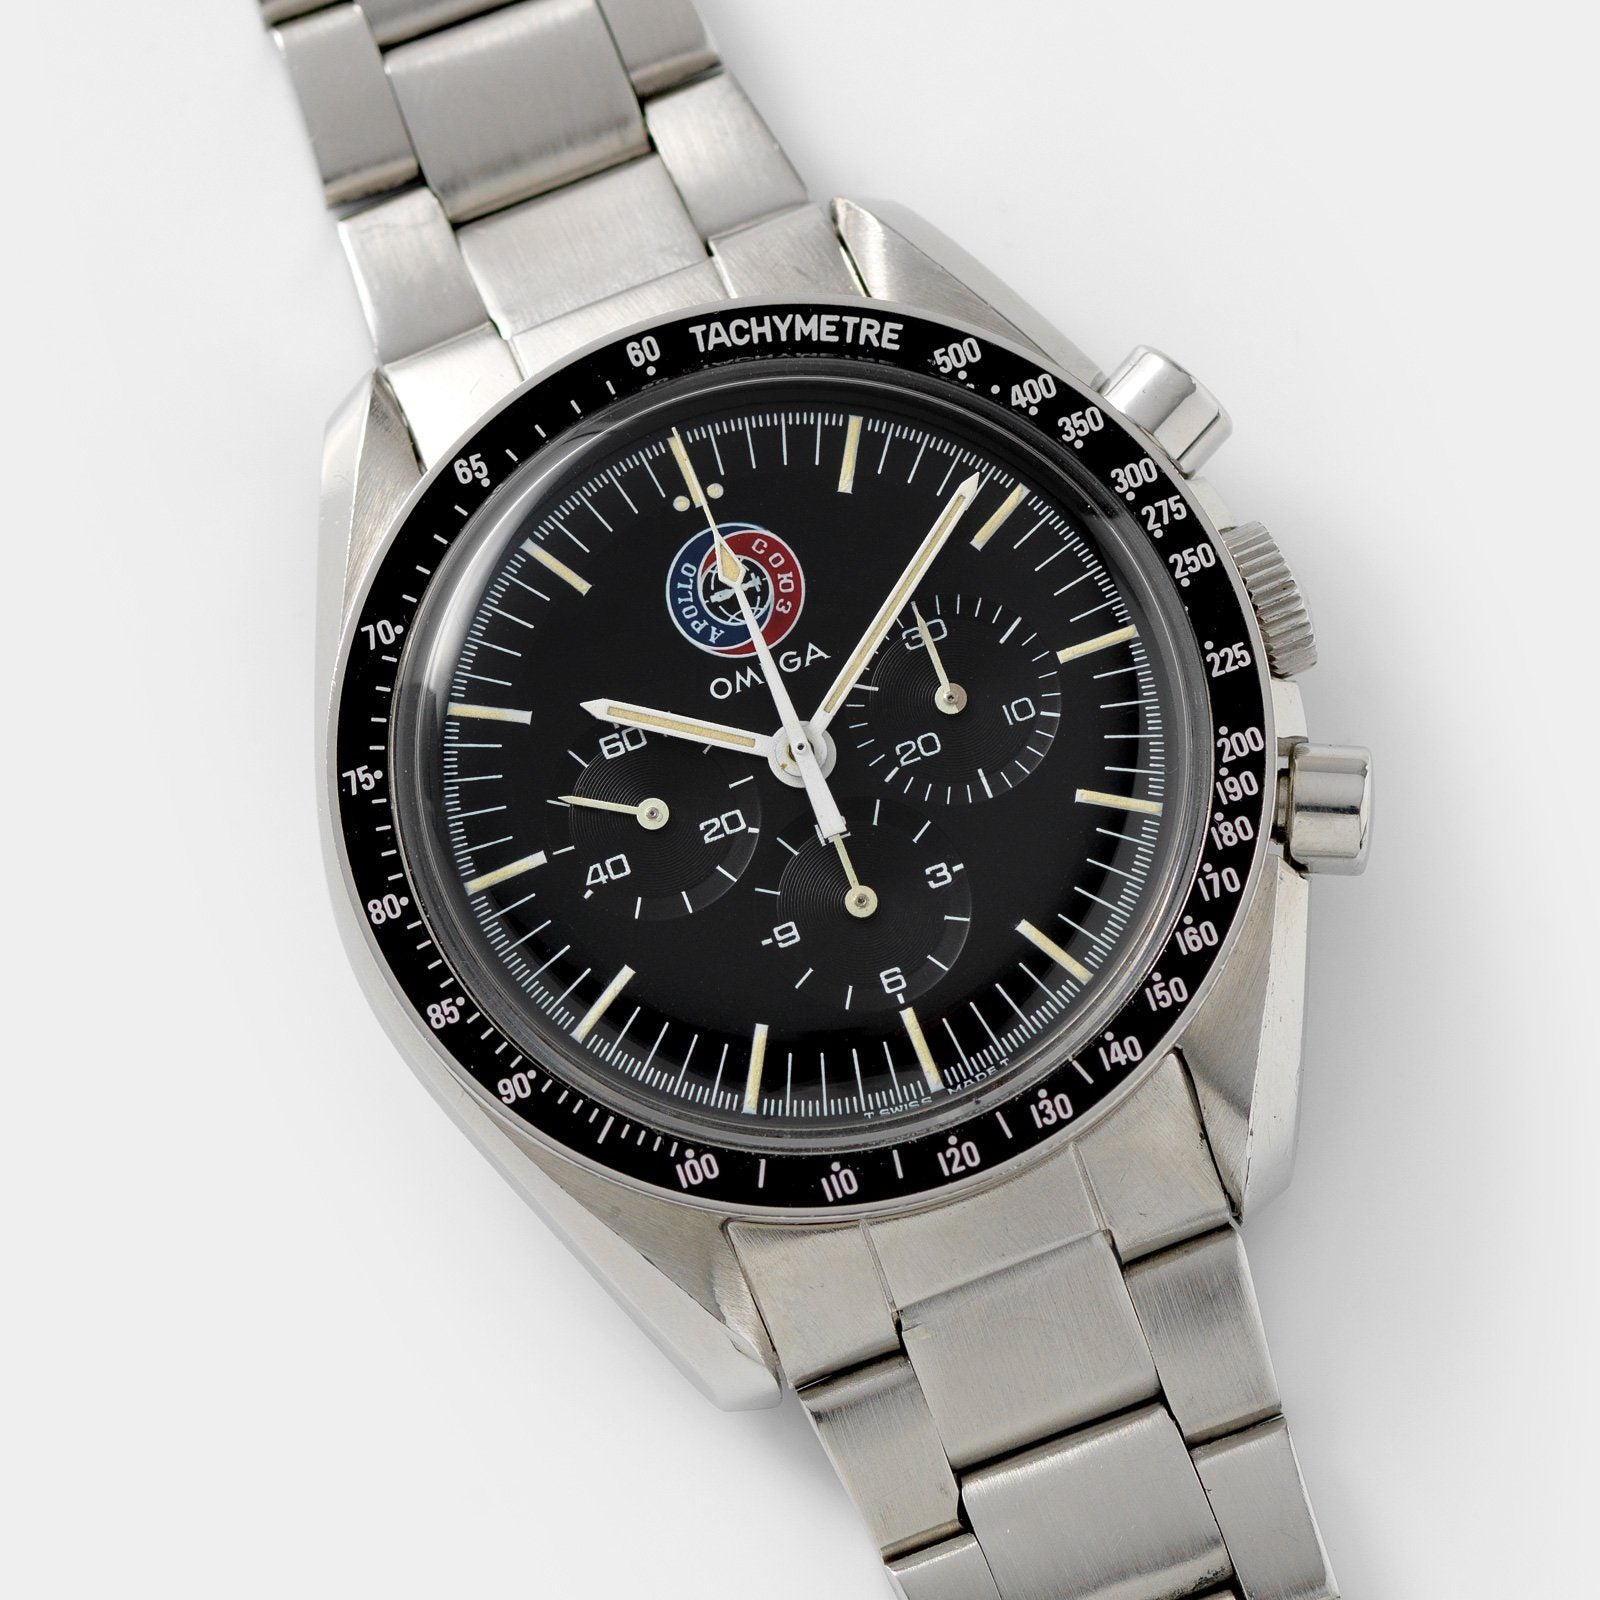 Omega Speedmaster Soyuz 145.022 with Archive Extract Number 111 out of 500